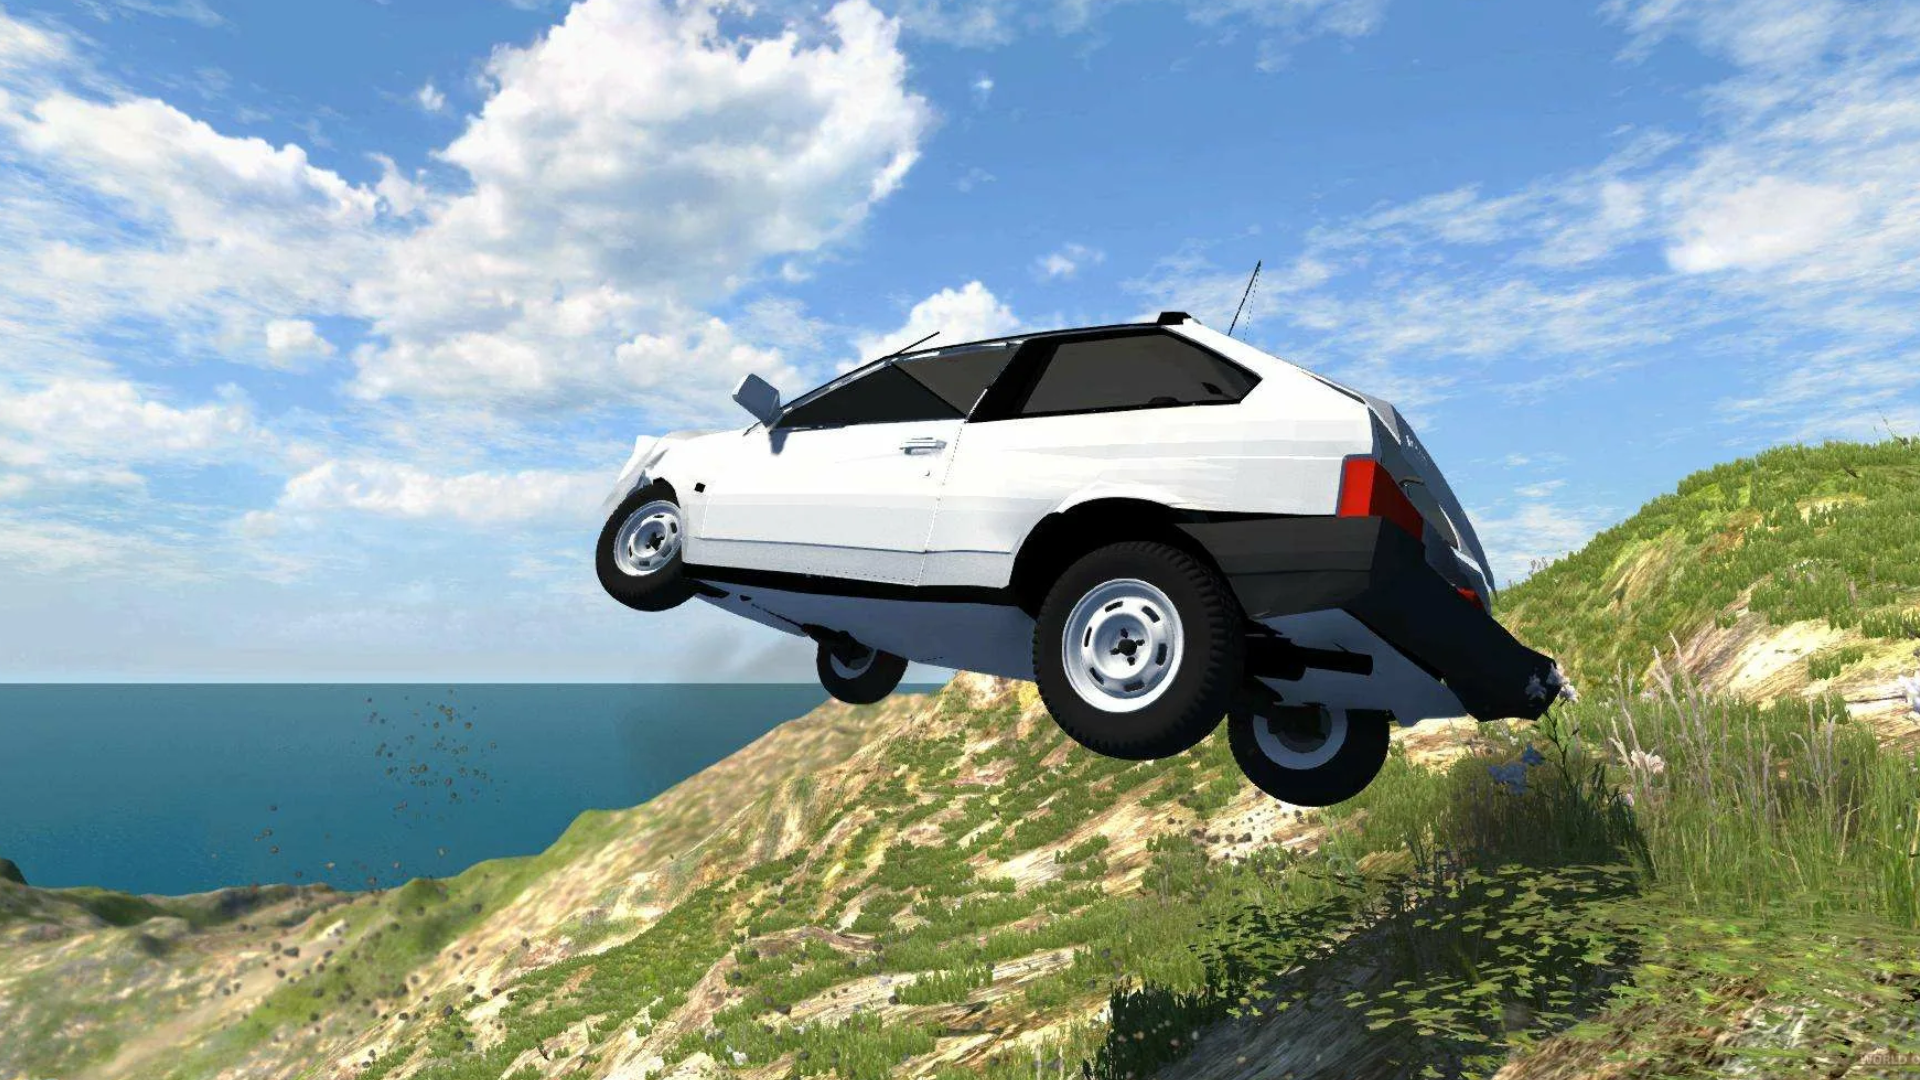 Driving simulator VAZ 2108 SE android iOS apk download for free-TapTap